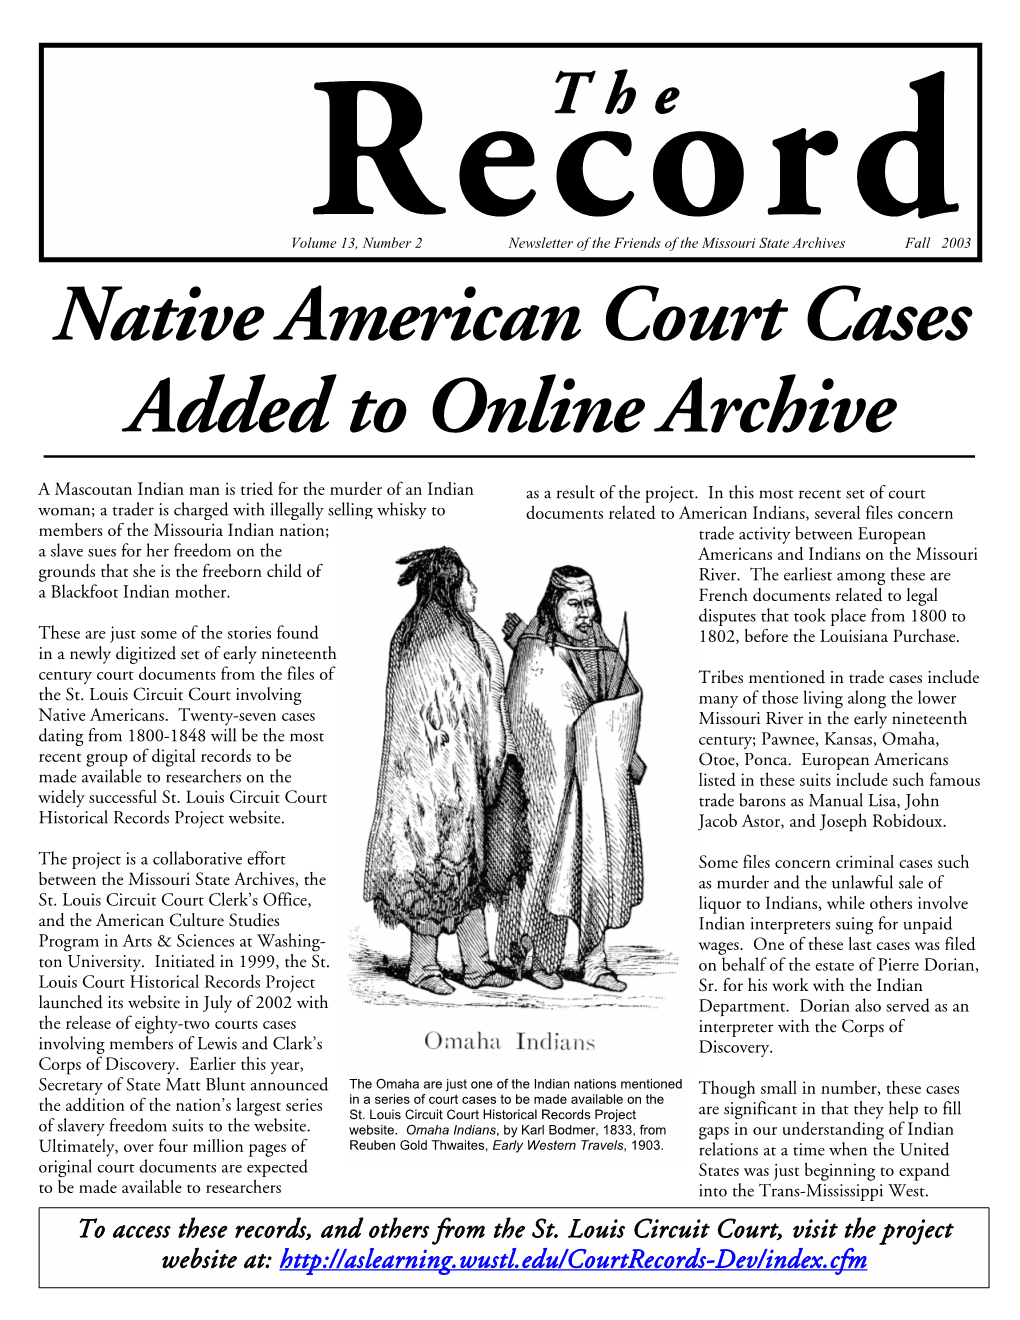 Added to Online Archive Native American Court Cases